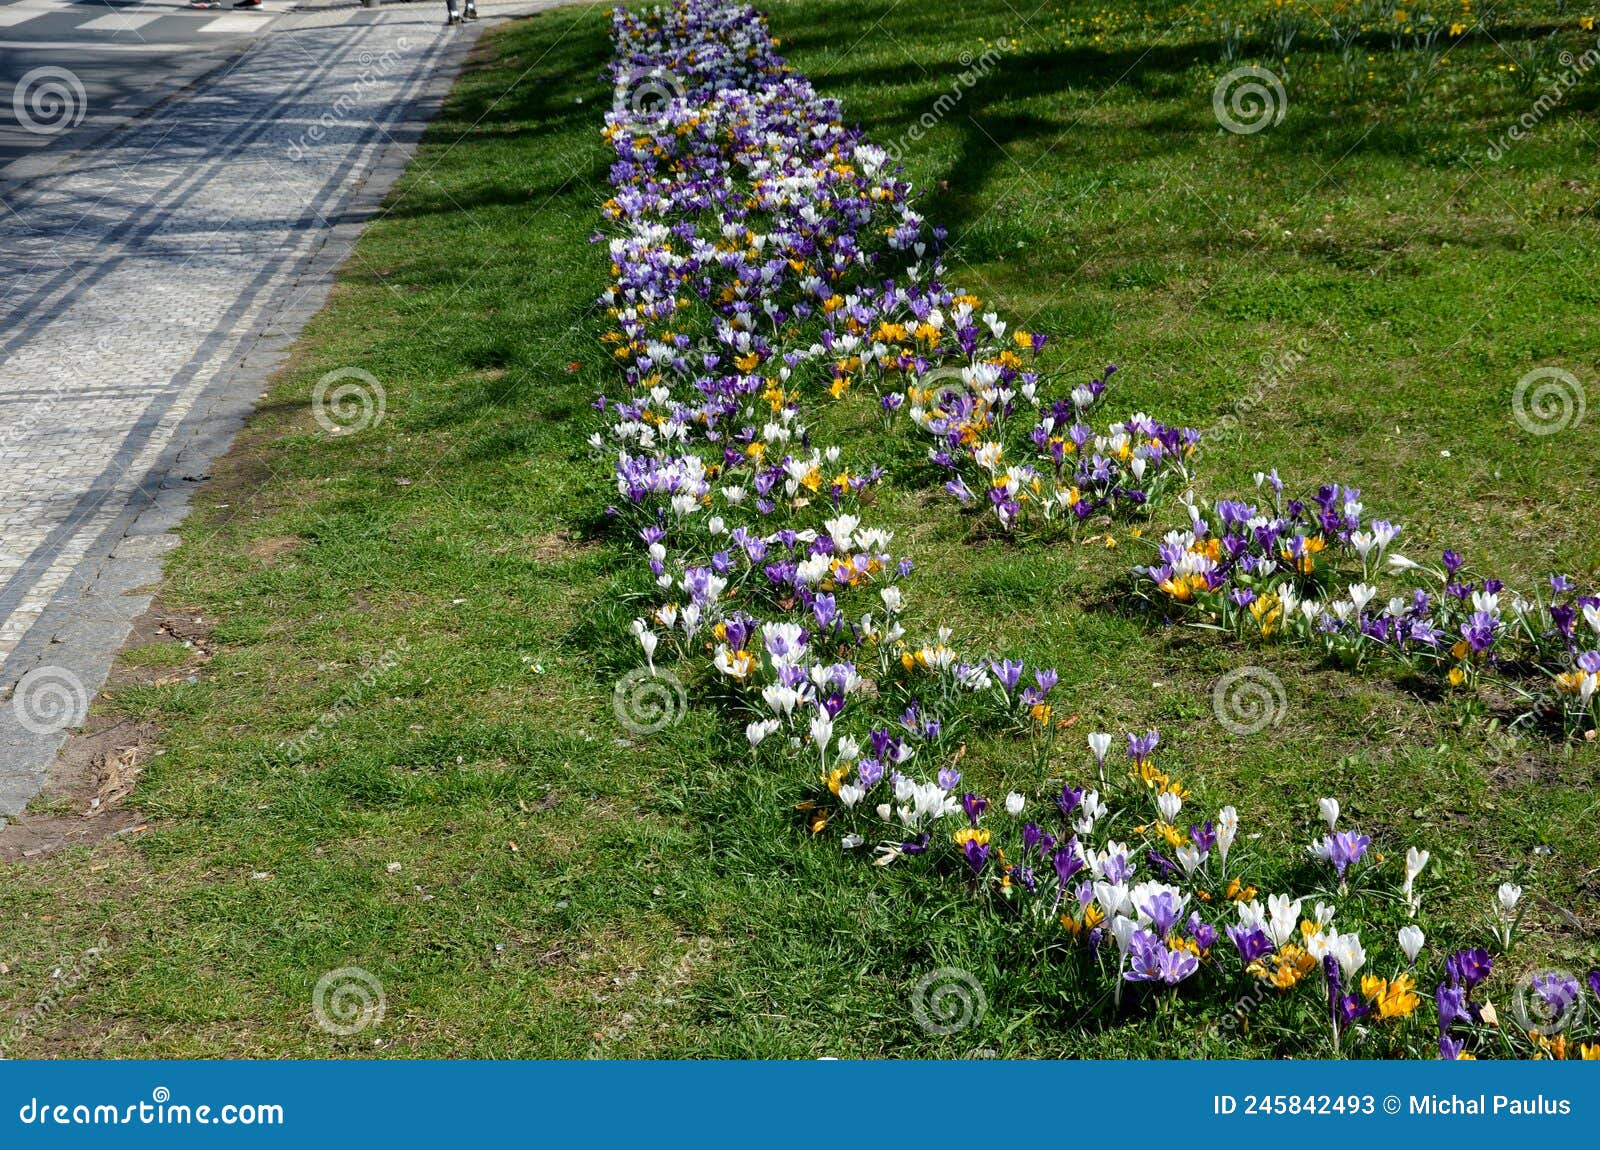 purple bulbs bloom in the grassy strip between the lanes in the city. crocuses in a dense carpet. highway beauty with horticultura